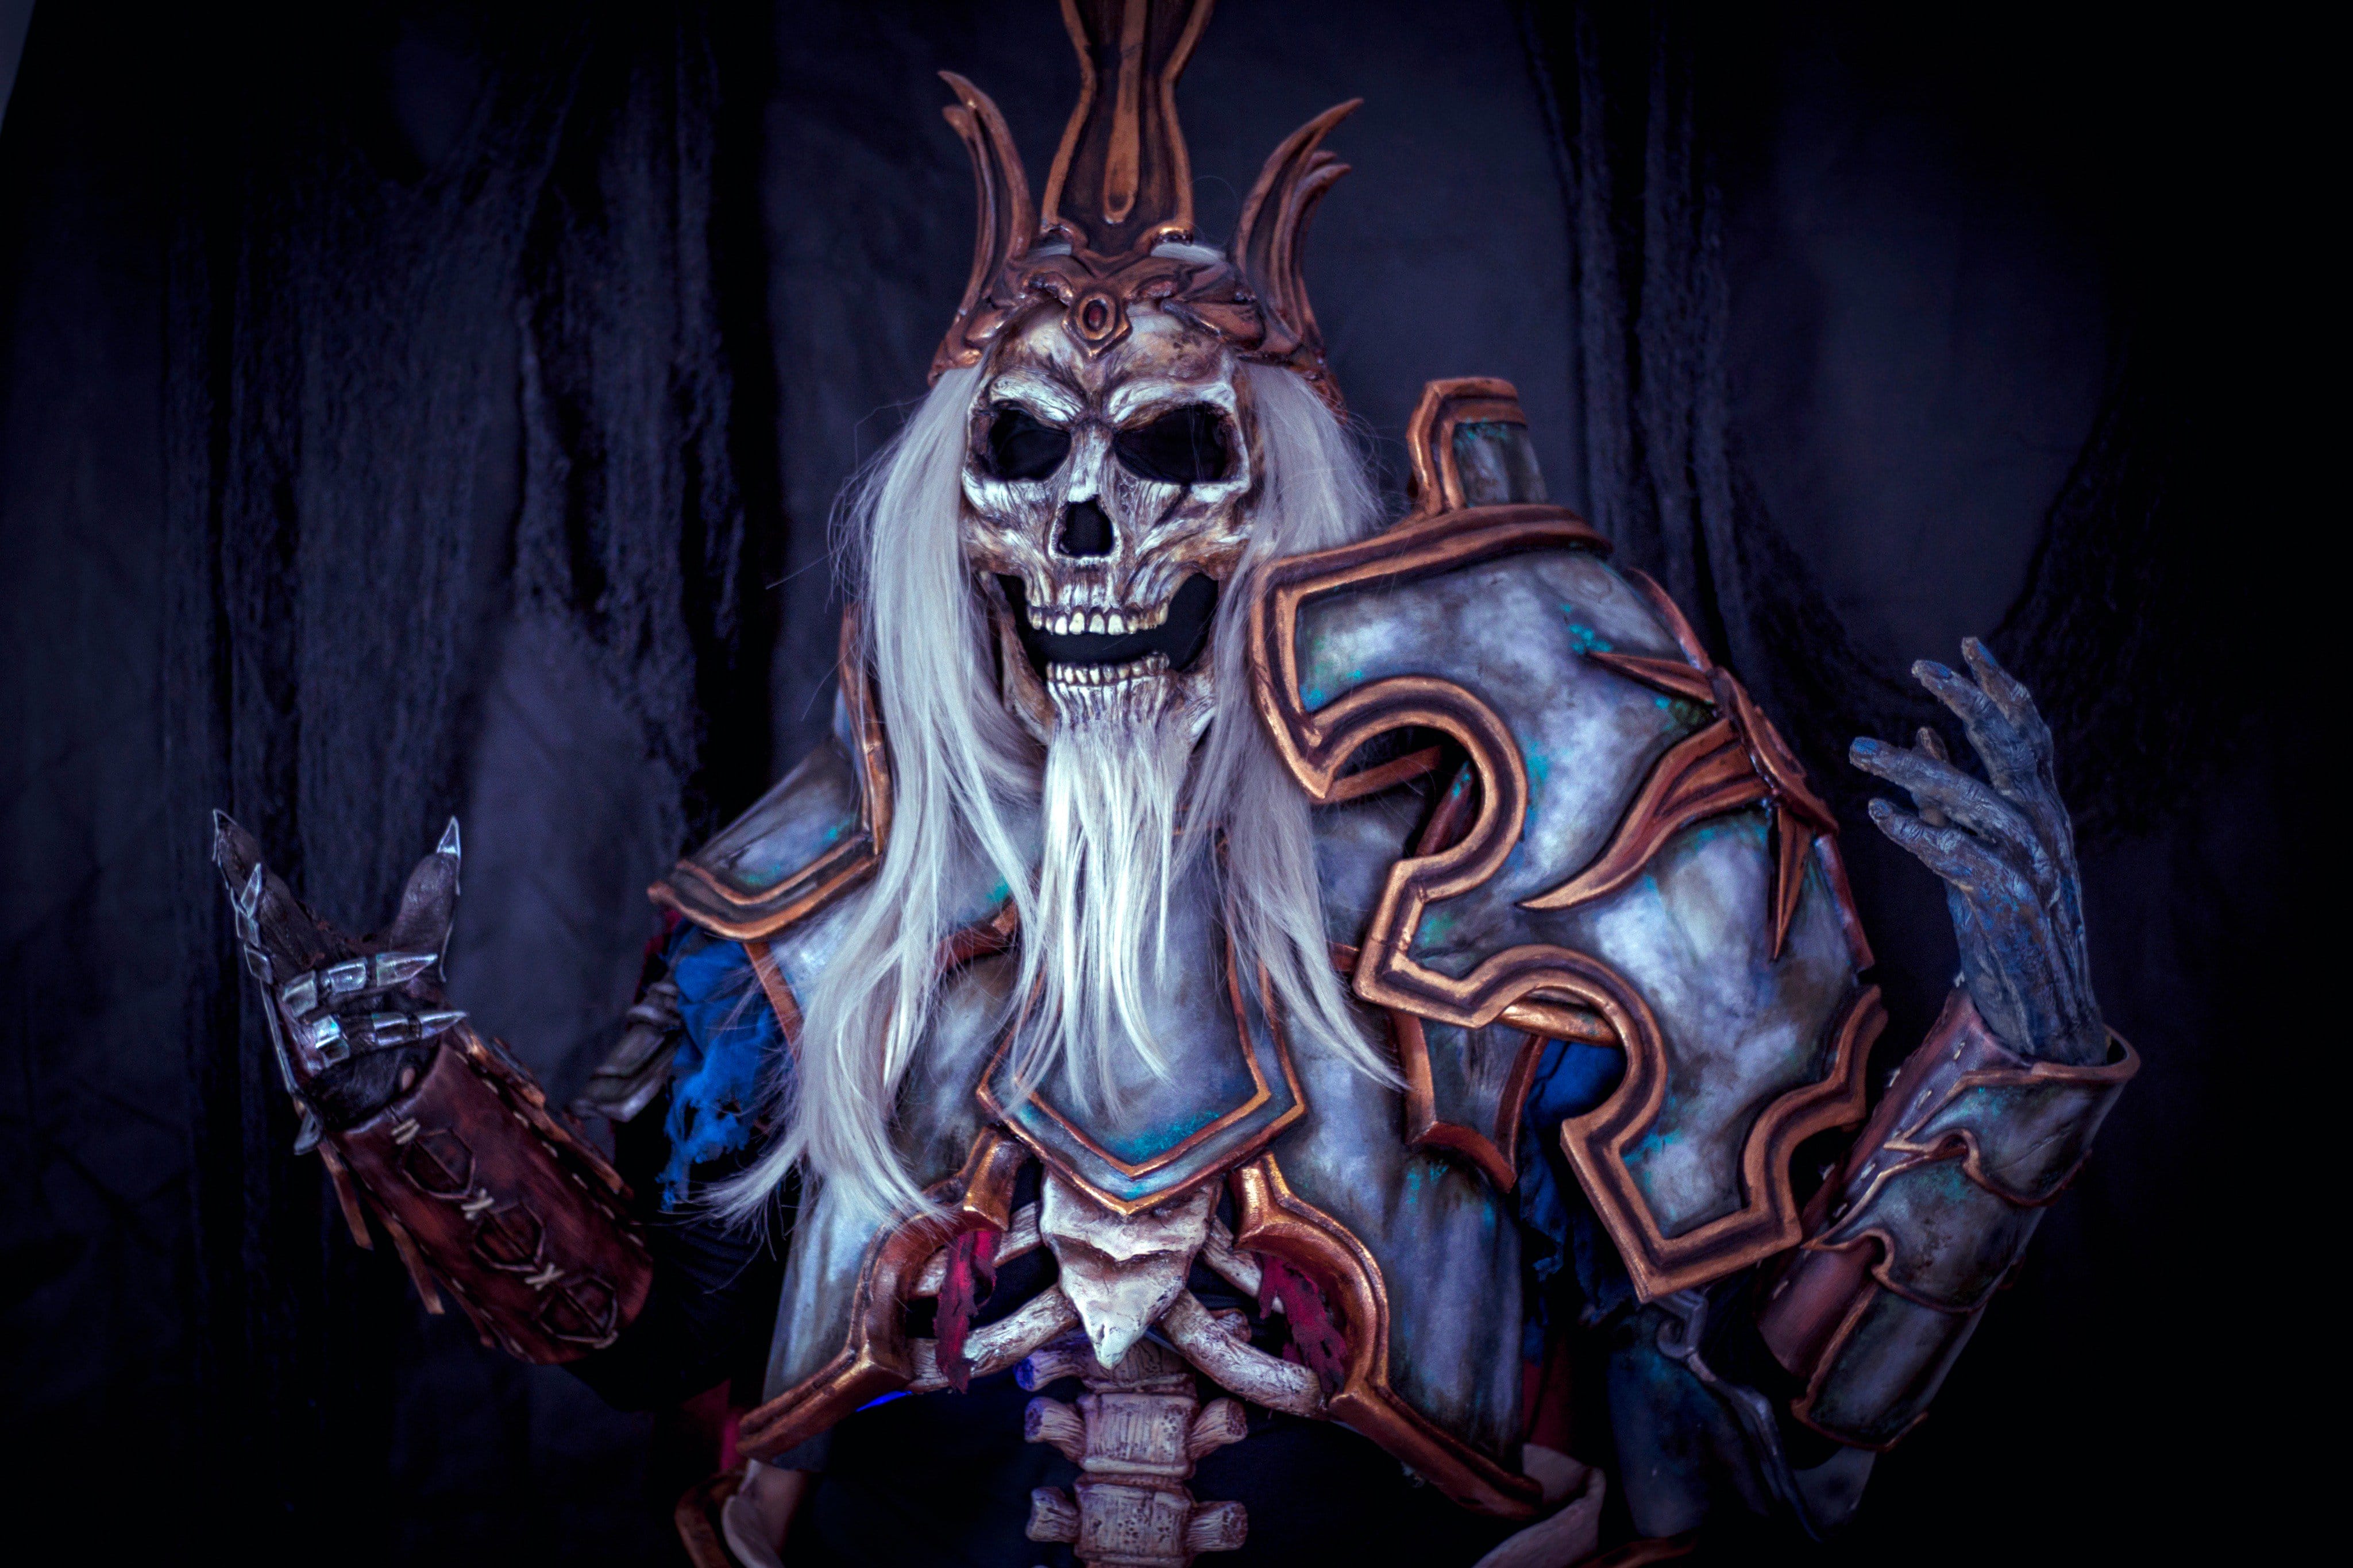 Leoric - The Mad King from Diablo